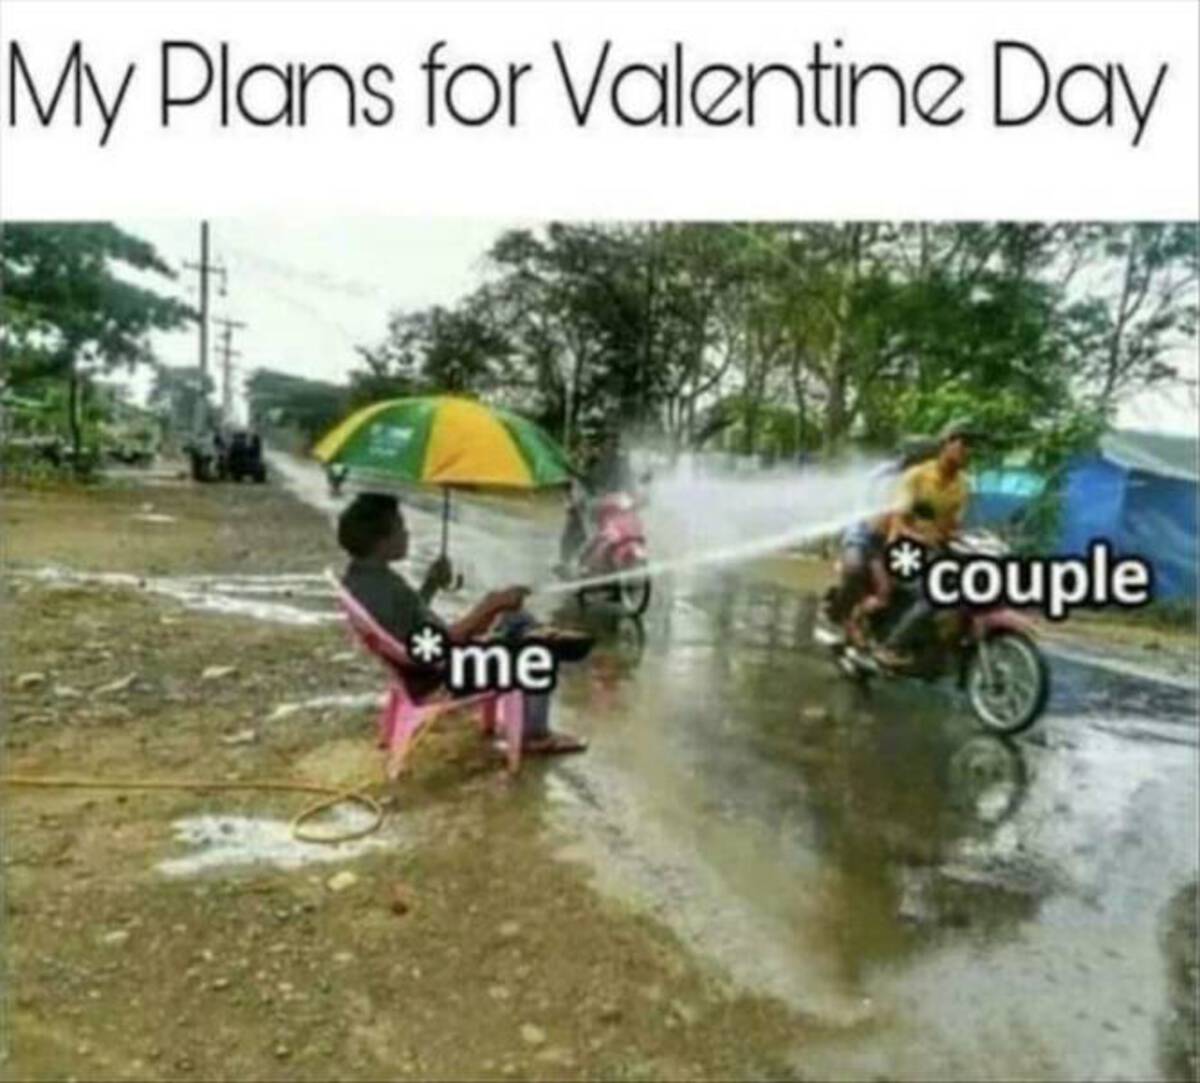 water resources - My Plans for Valentine Day tatte me couple